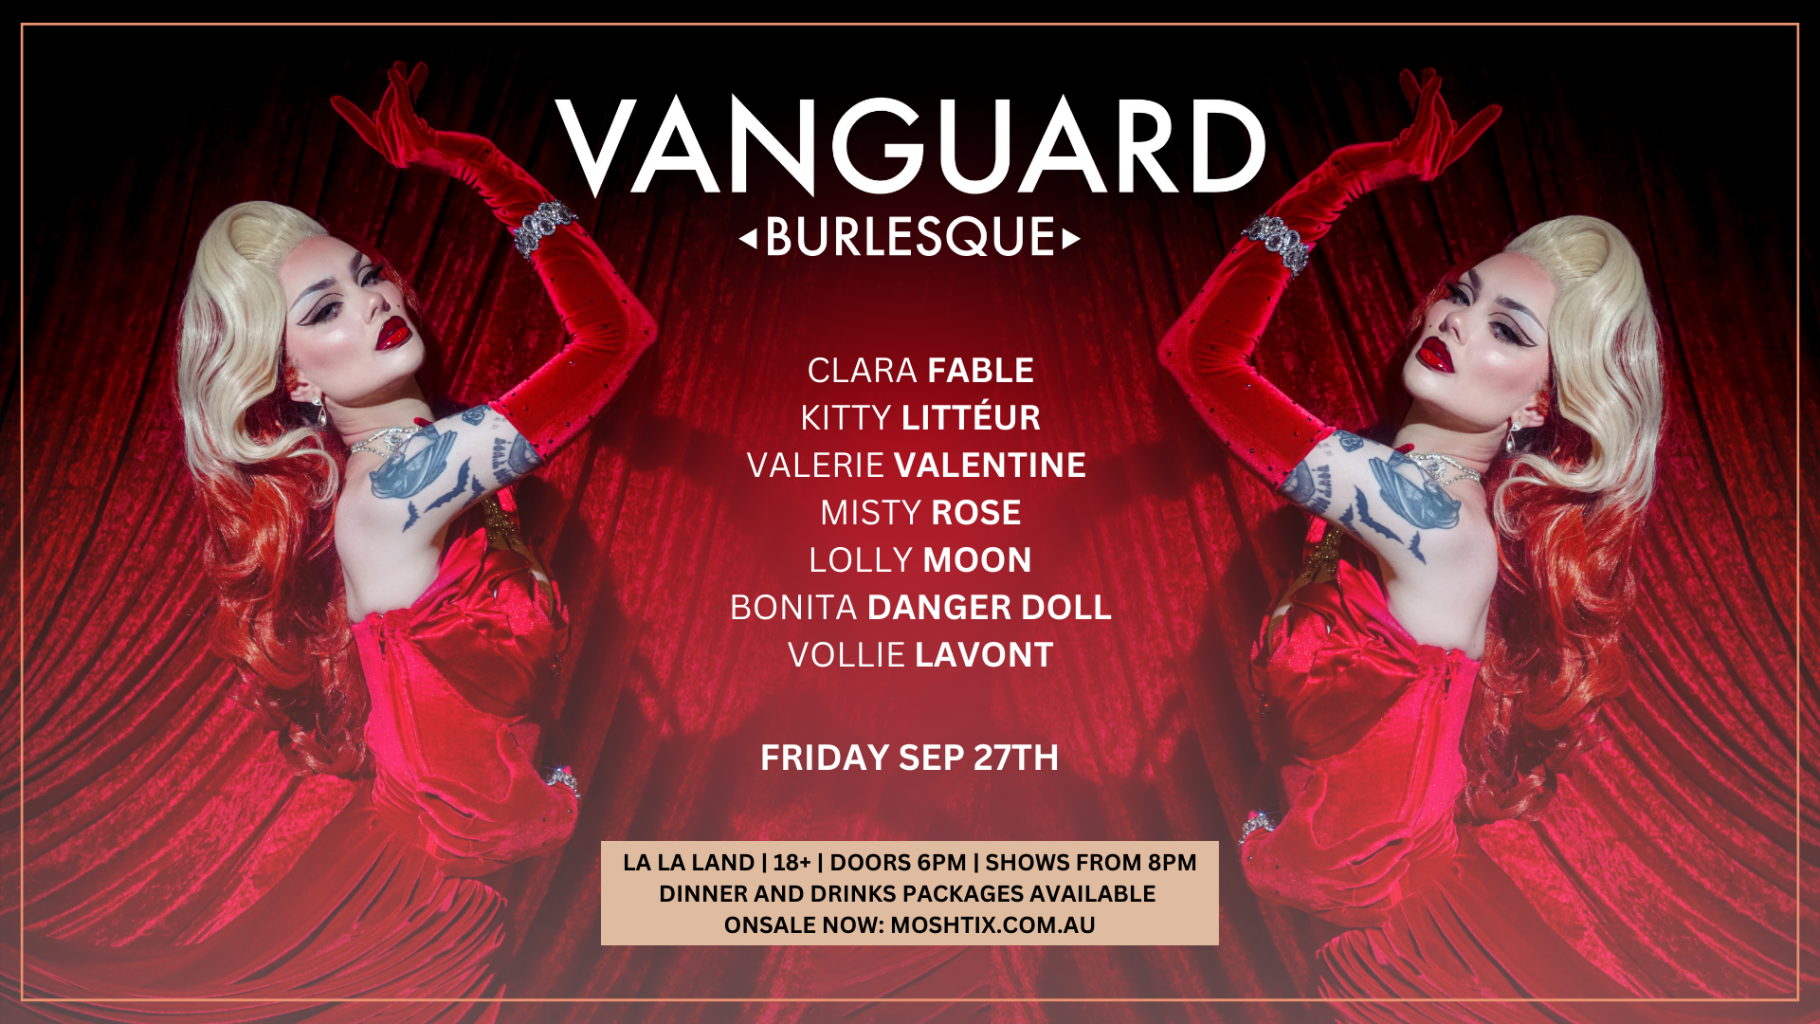 Vanguard Burlesque feat. Clara Fable | Events at The Prince Consort